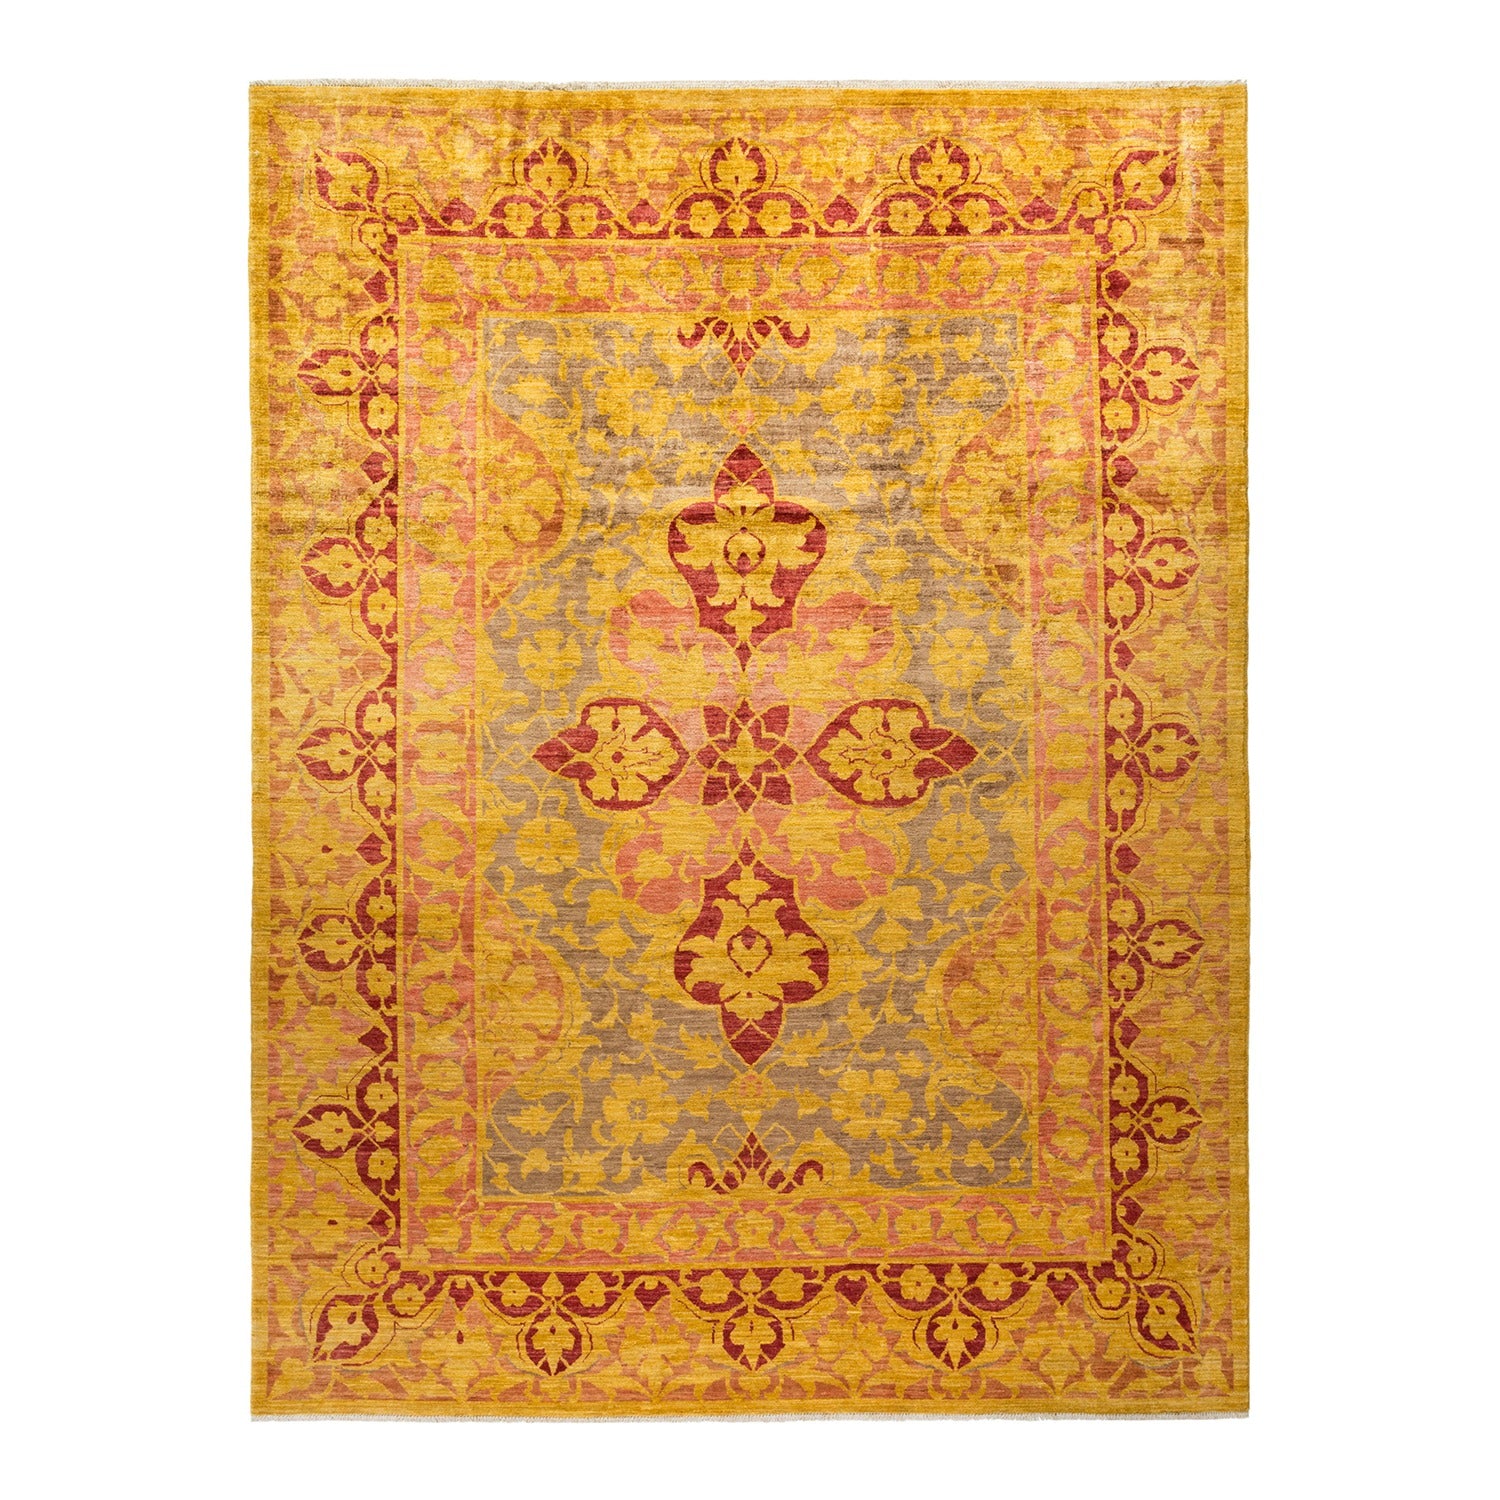 An ornate rug with intricate patterns and rich colors.